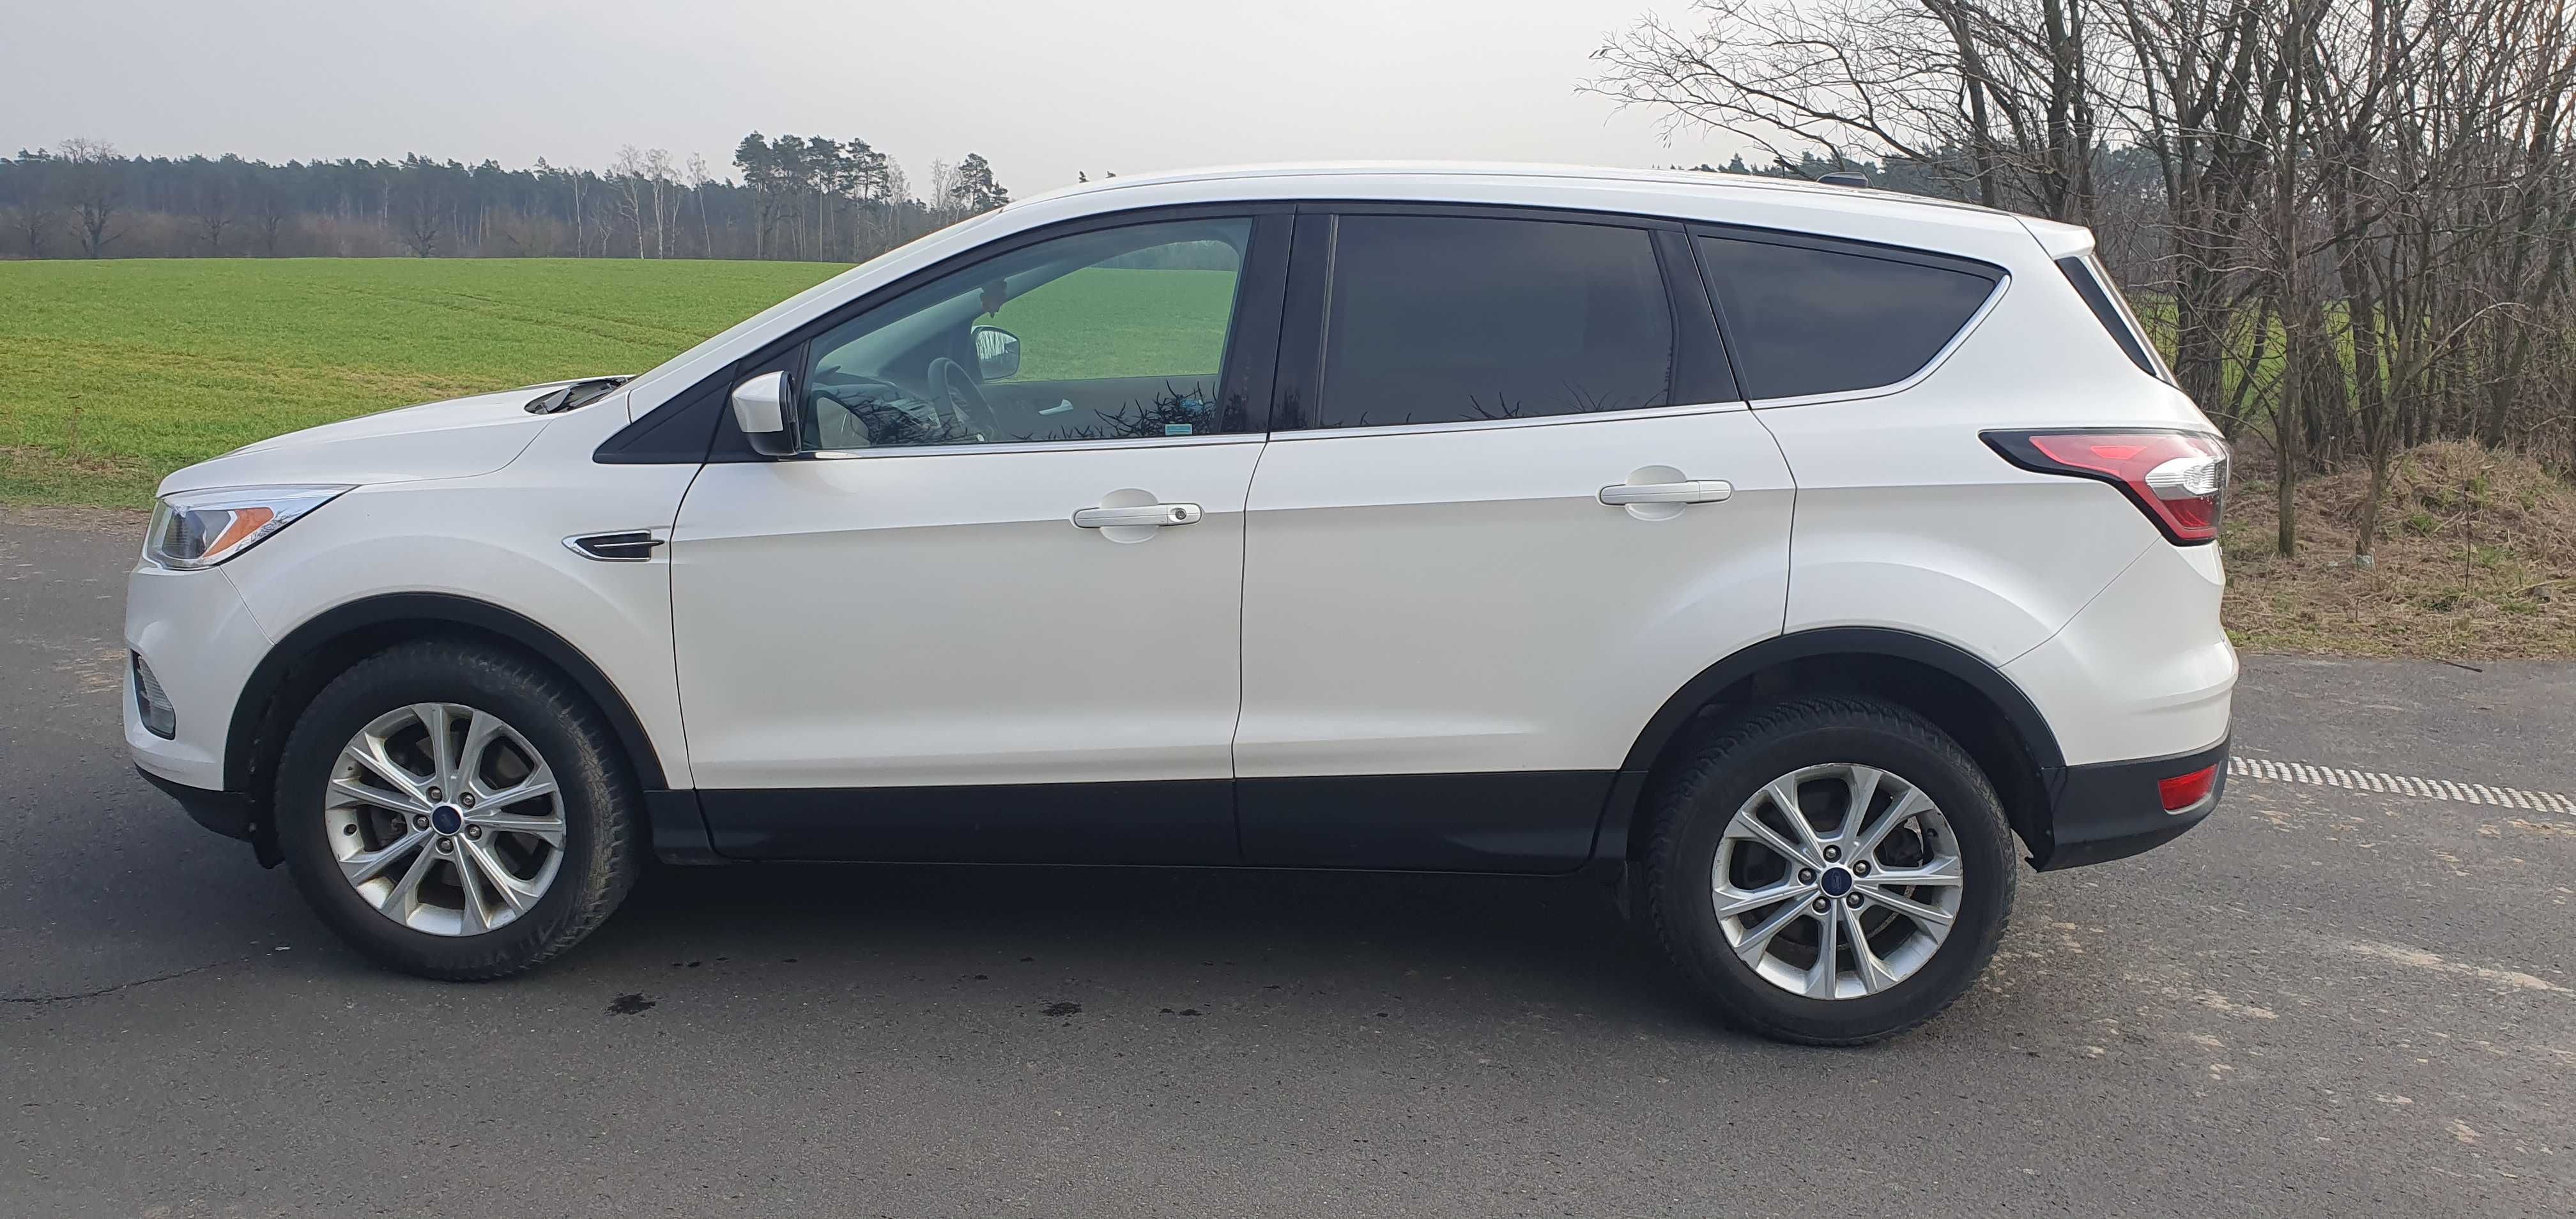 Ford Kuga / Escape 1.5 ecoboost 4x4 automat